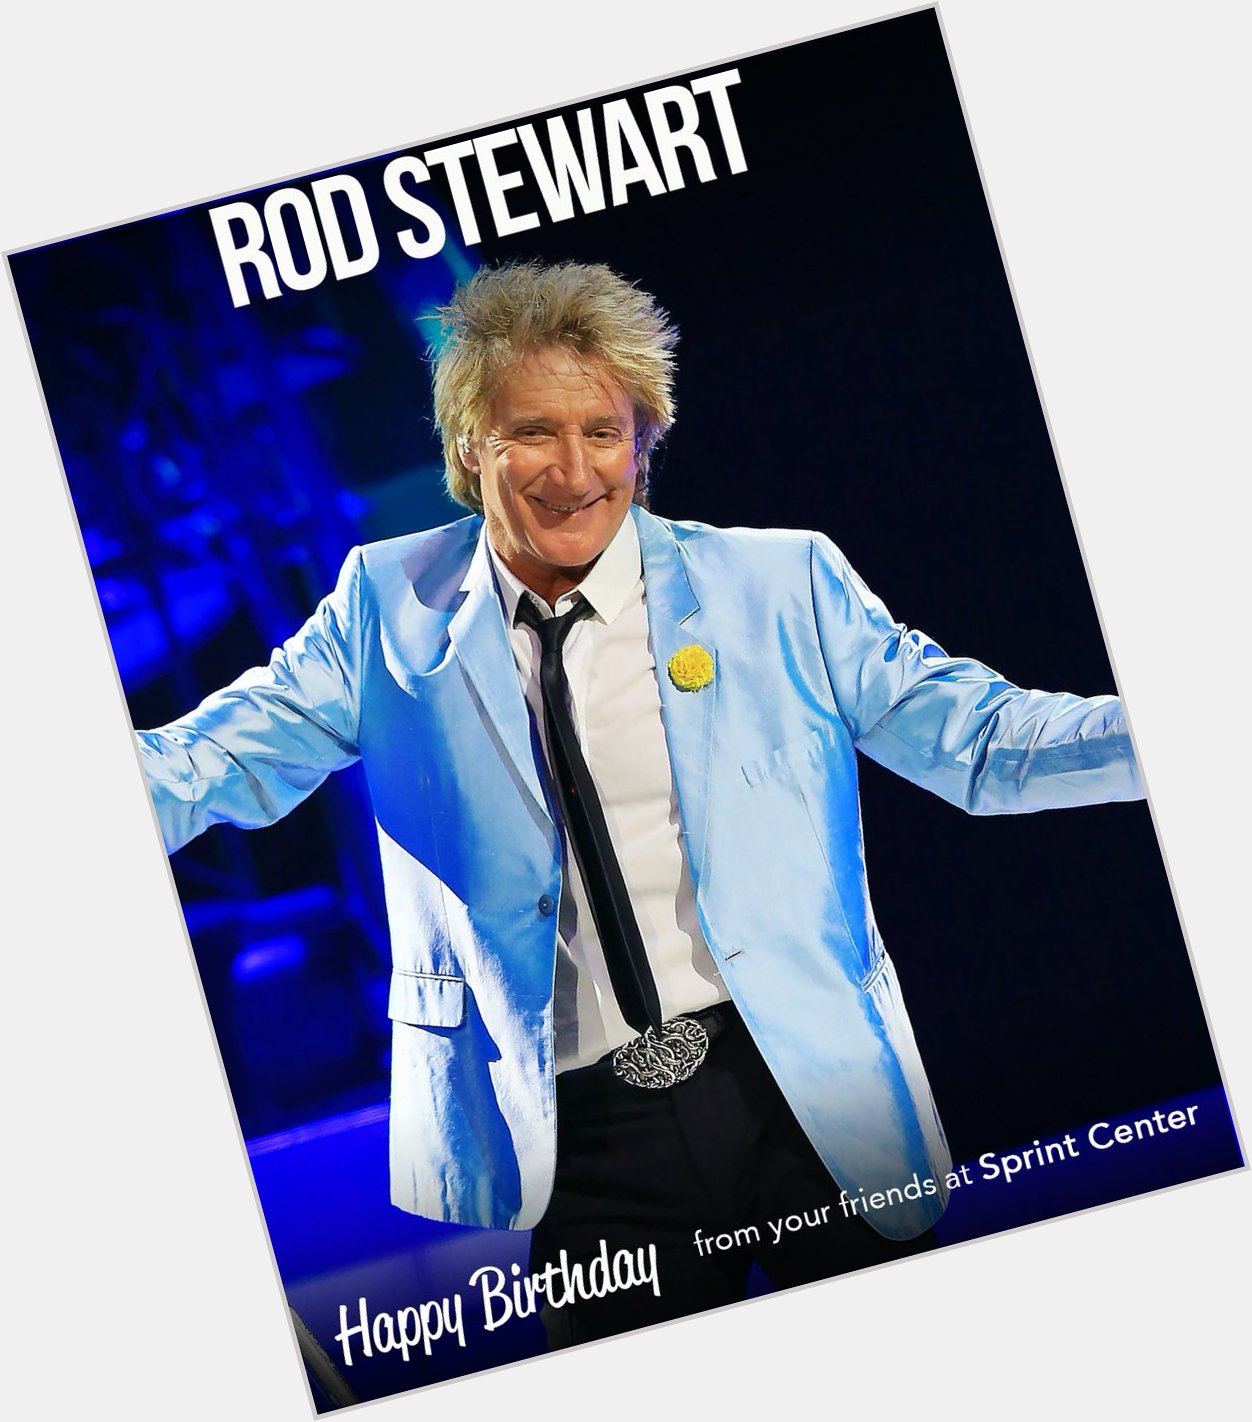 Happy Birthday, Rod Stewart! We will see you at Sprint Center on Aug. 14.  